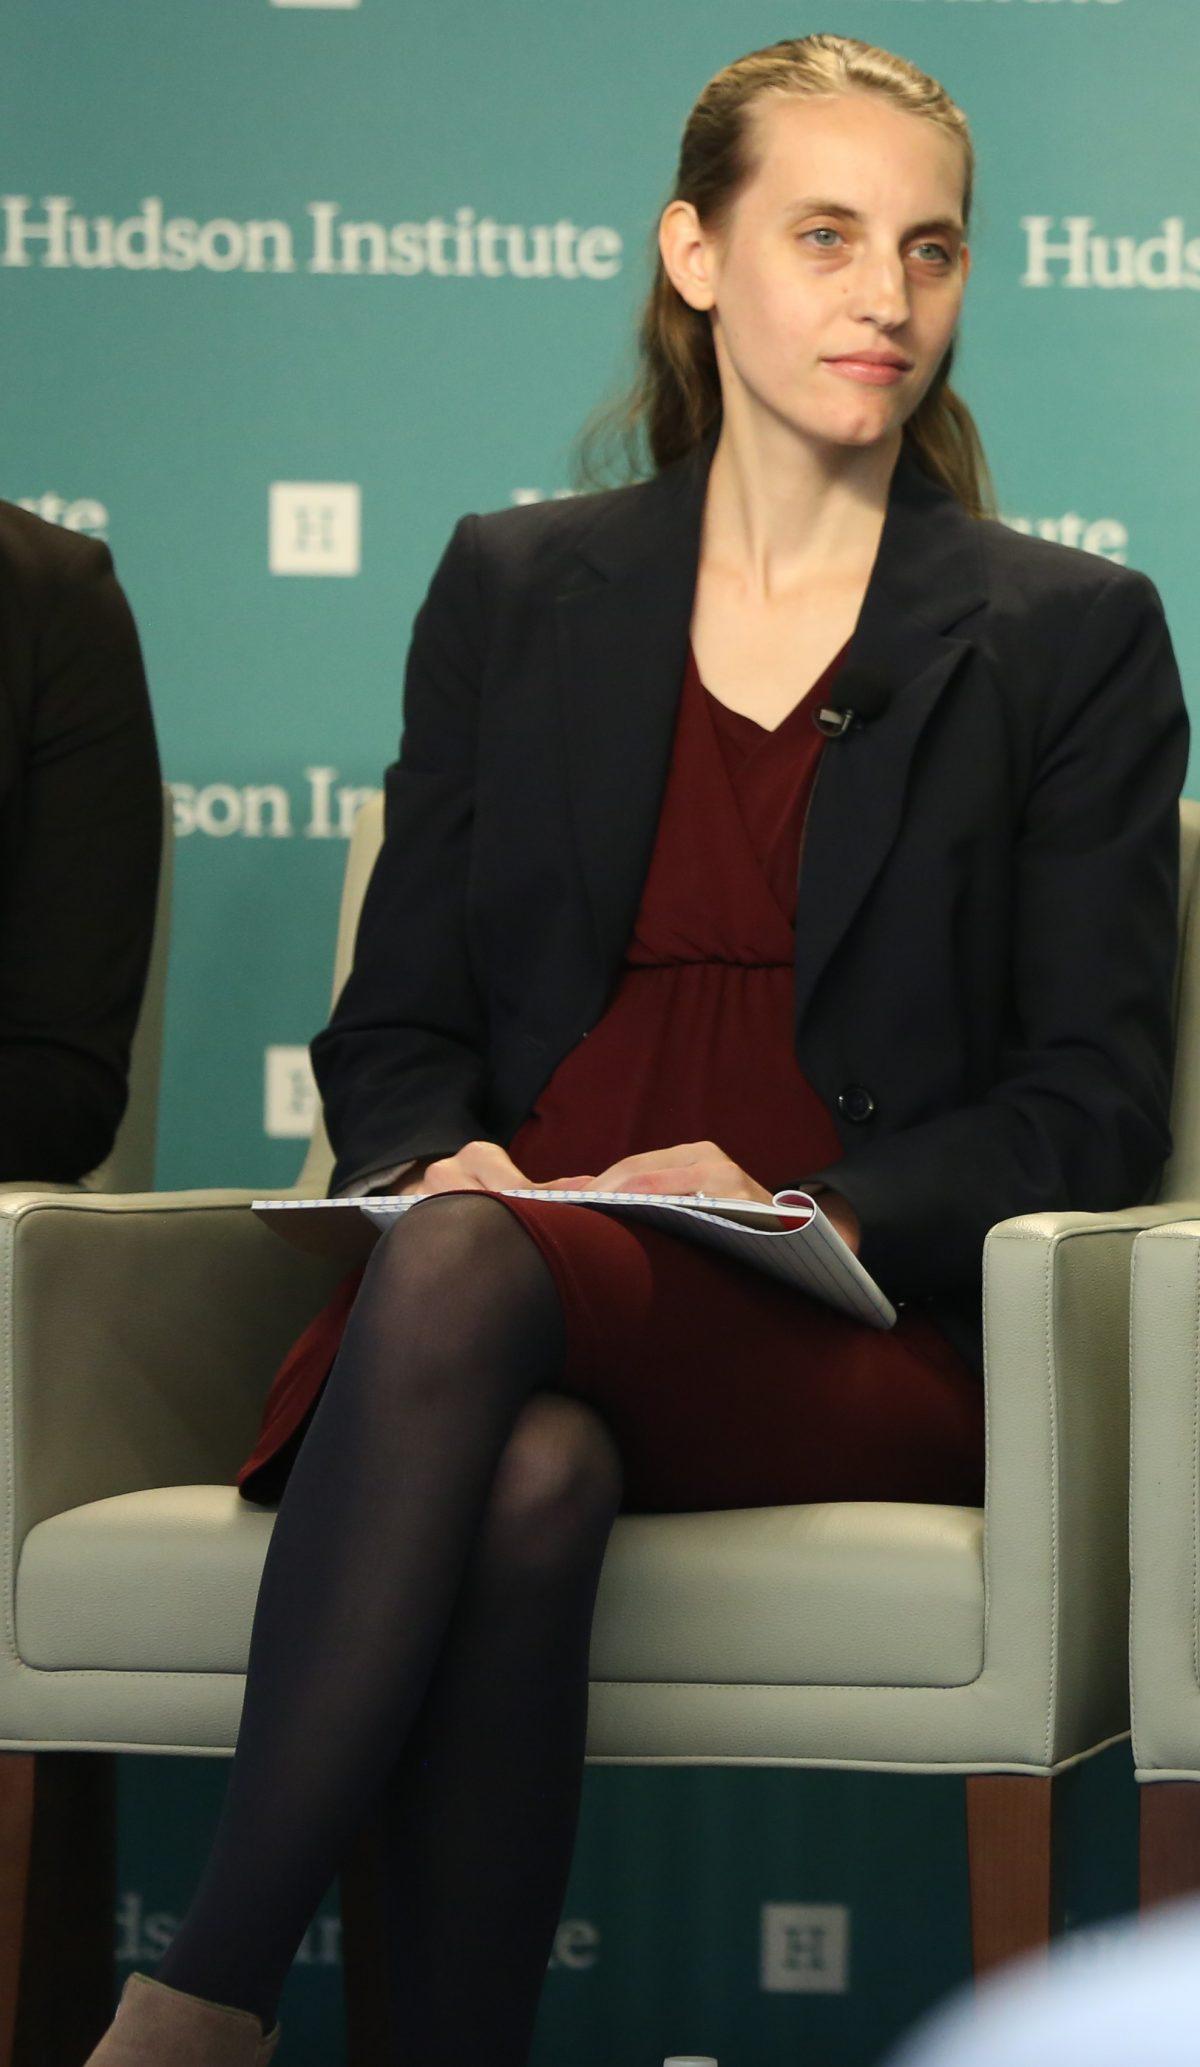 Rachelle Peterson, policy director at the National Association of Scholars, speaking at the "Mark Palmer Forum: China's Global Challenge to Democratic Freedom" at the Hudson Institute in Washington on Oct. 24, 2018. (York Du/NTD)